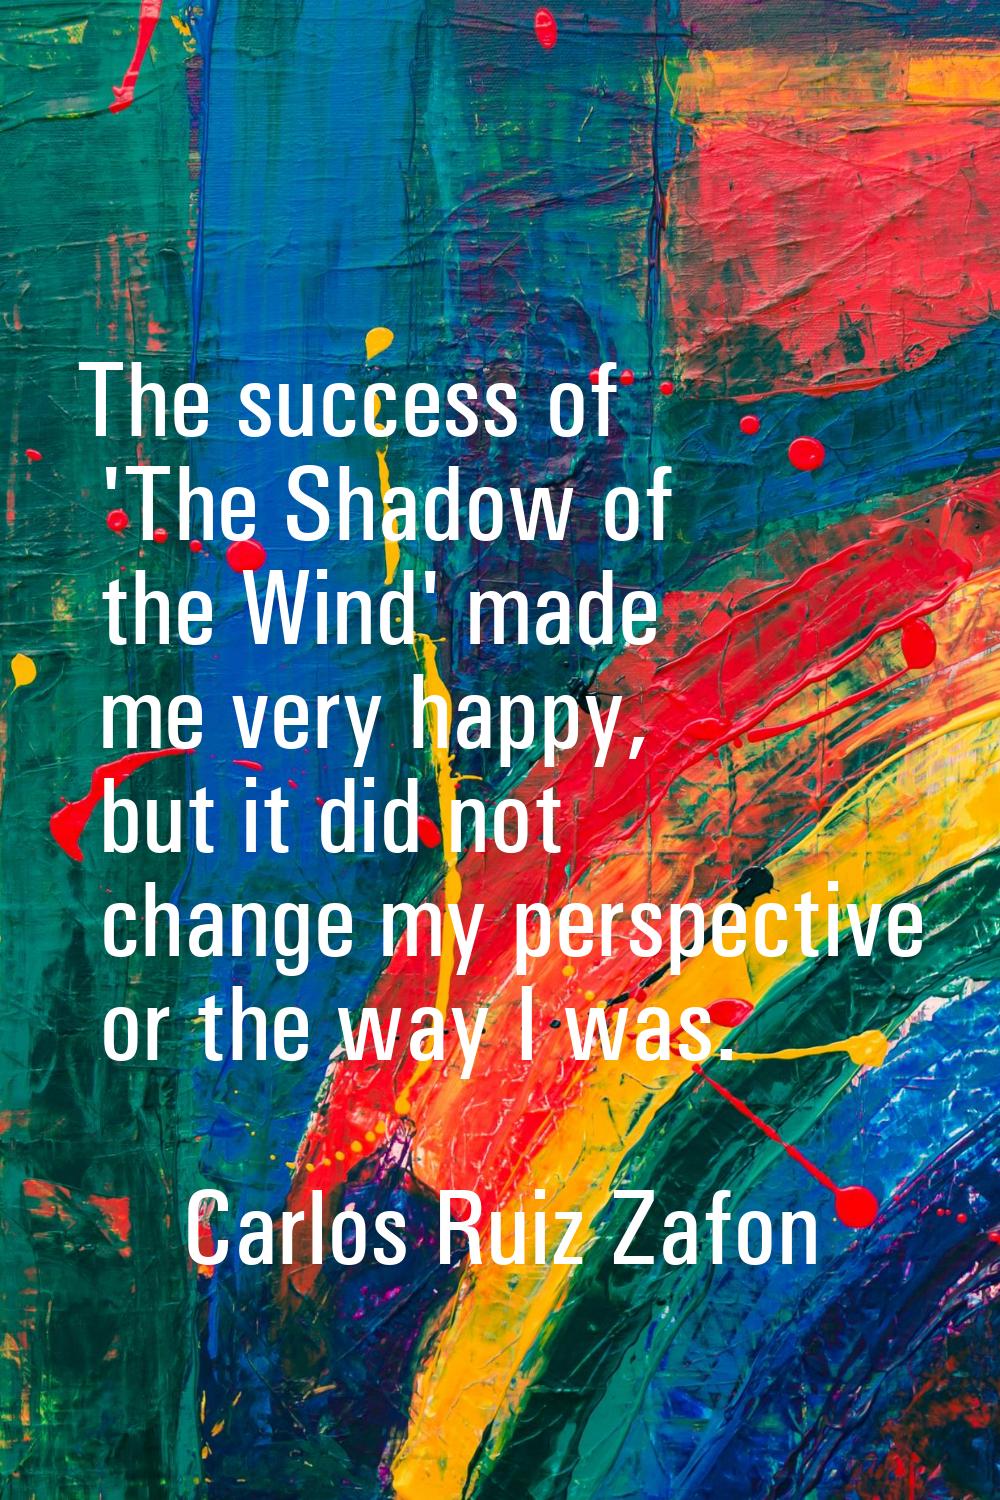 The success of 'The Shadow of the Wind' made me very happy, but it did not change my perspective or